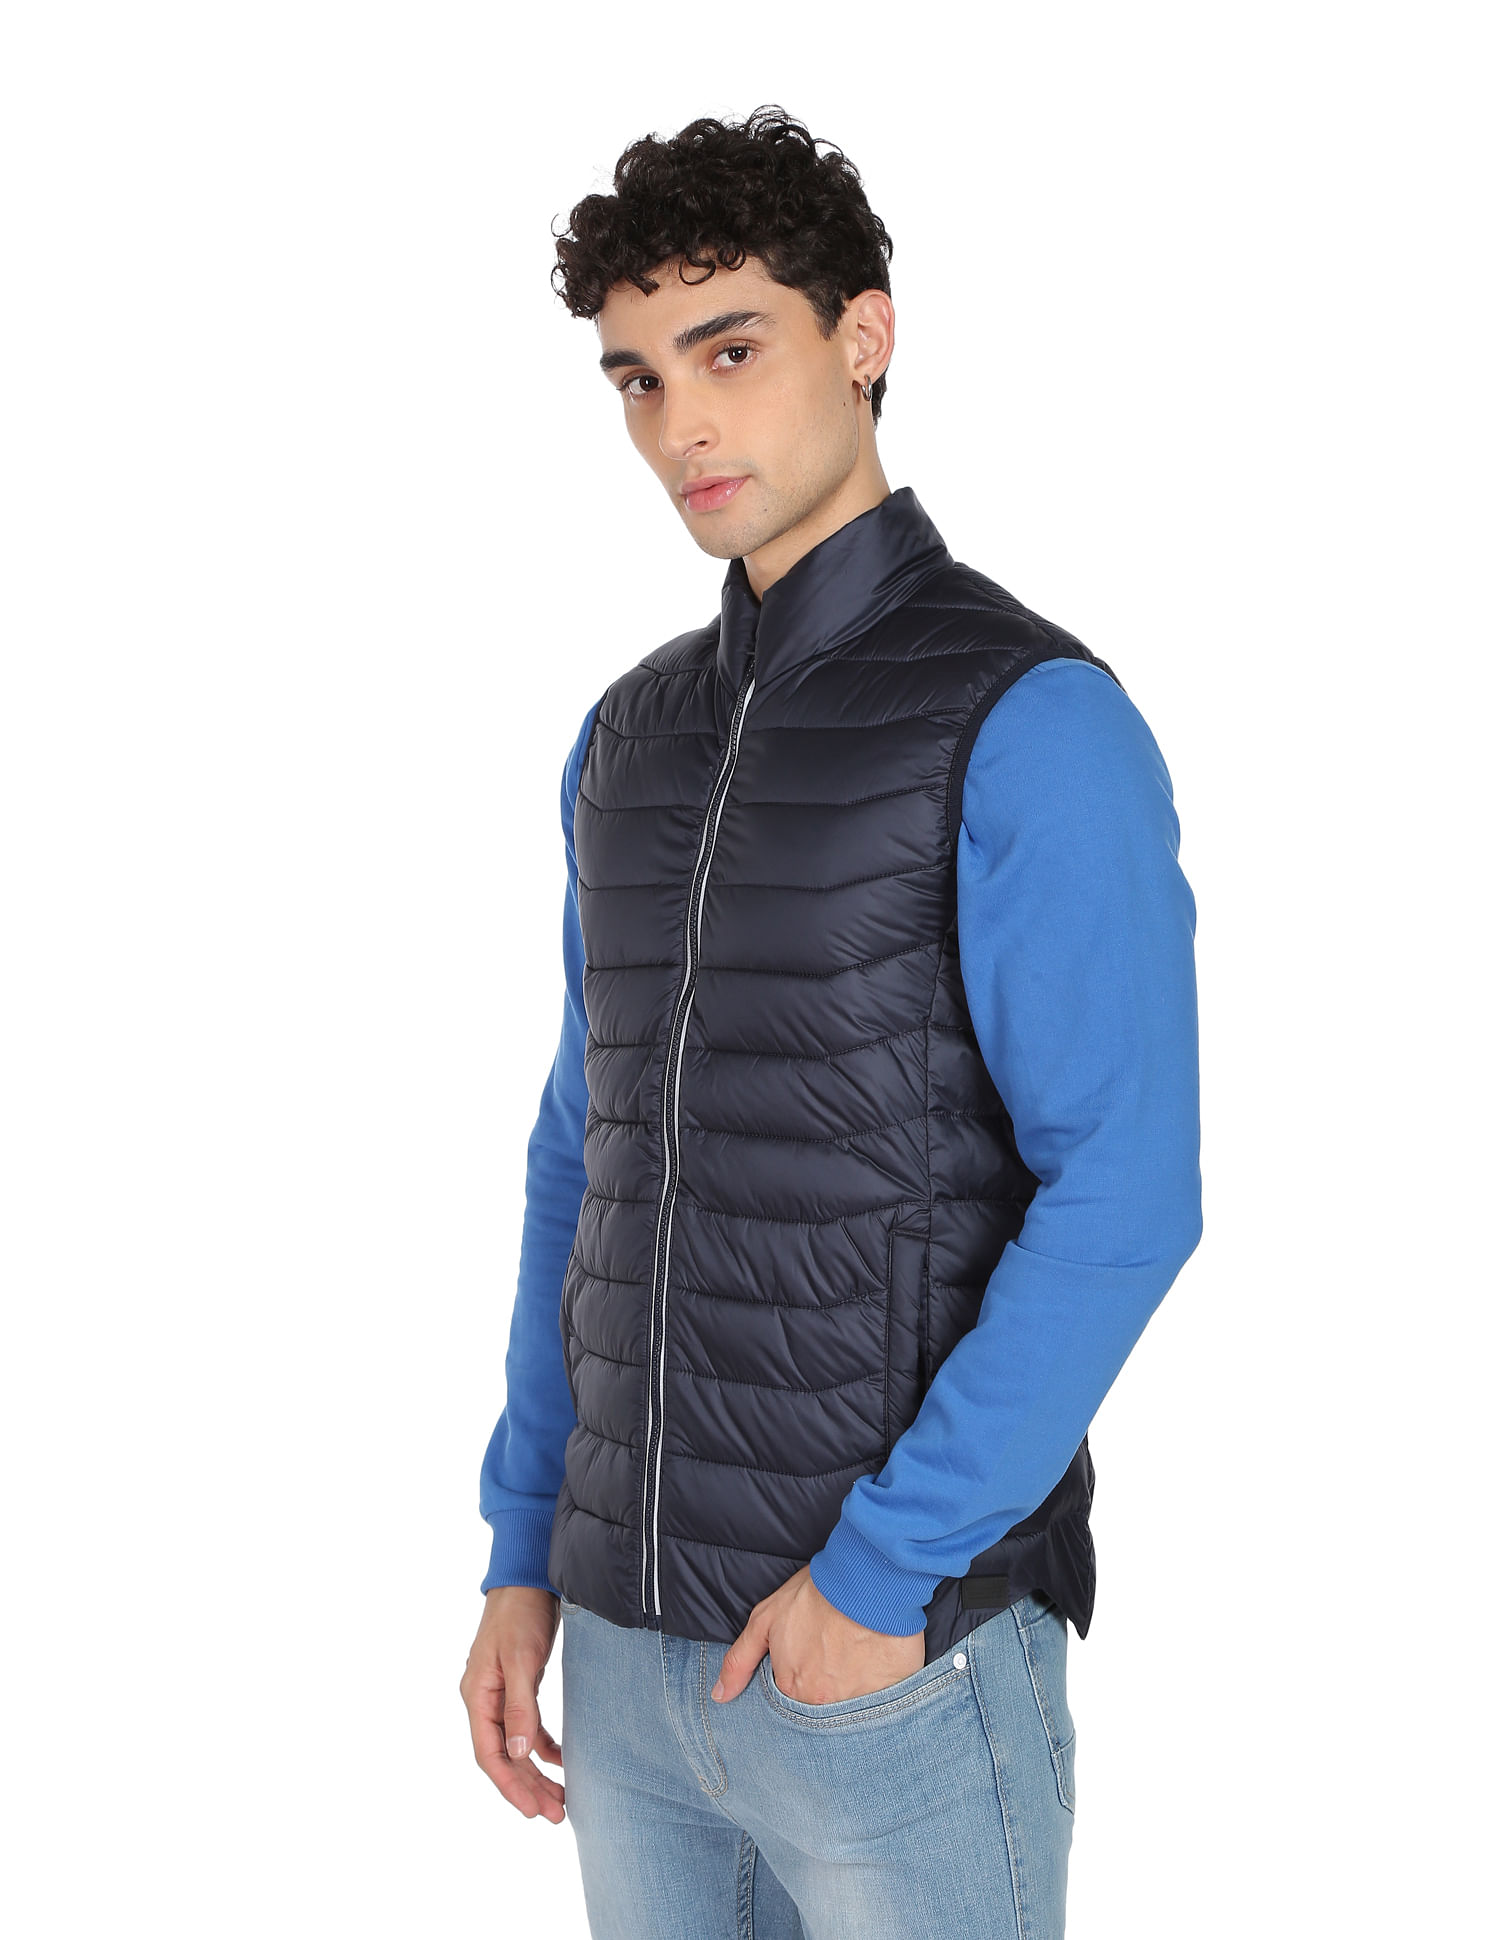 Men's Jacket in Stretch Fabric. Sleeveless Zippered with Pockets. Raised  Collar.